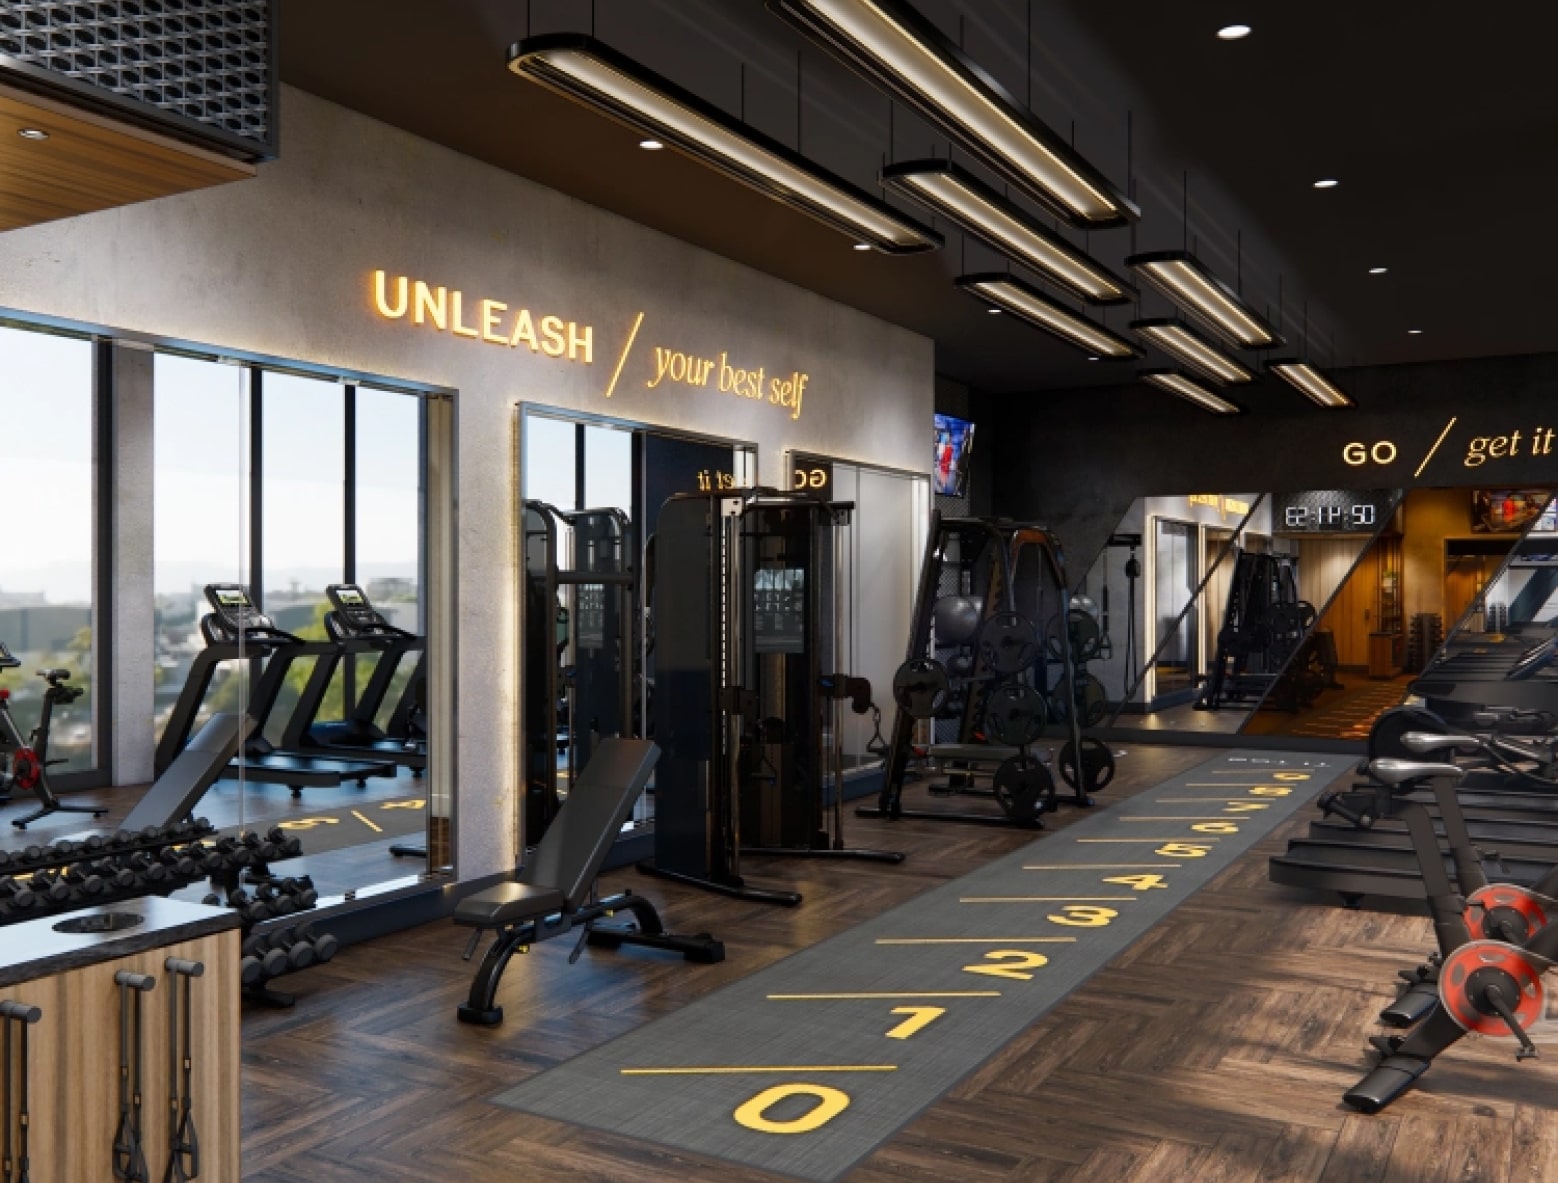 Luxery workout room at a Hilton Hotel.